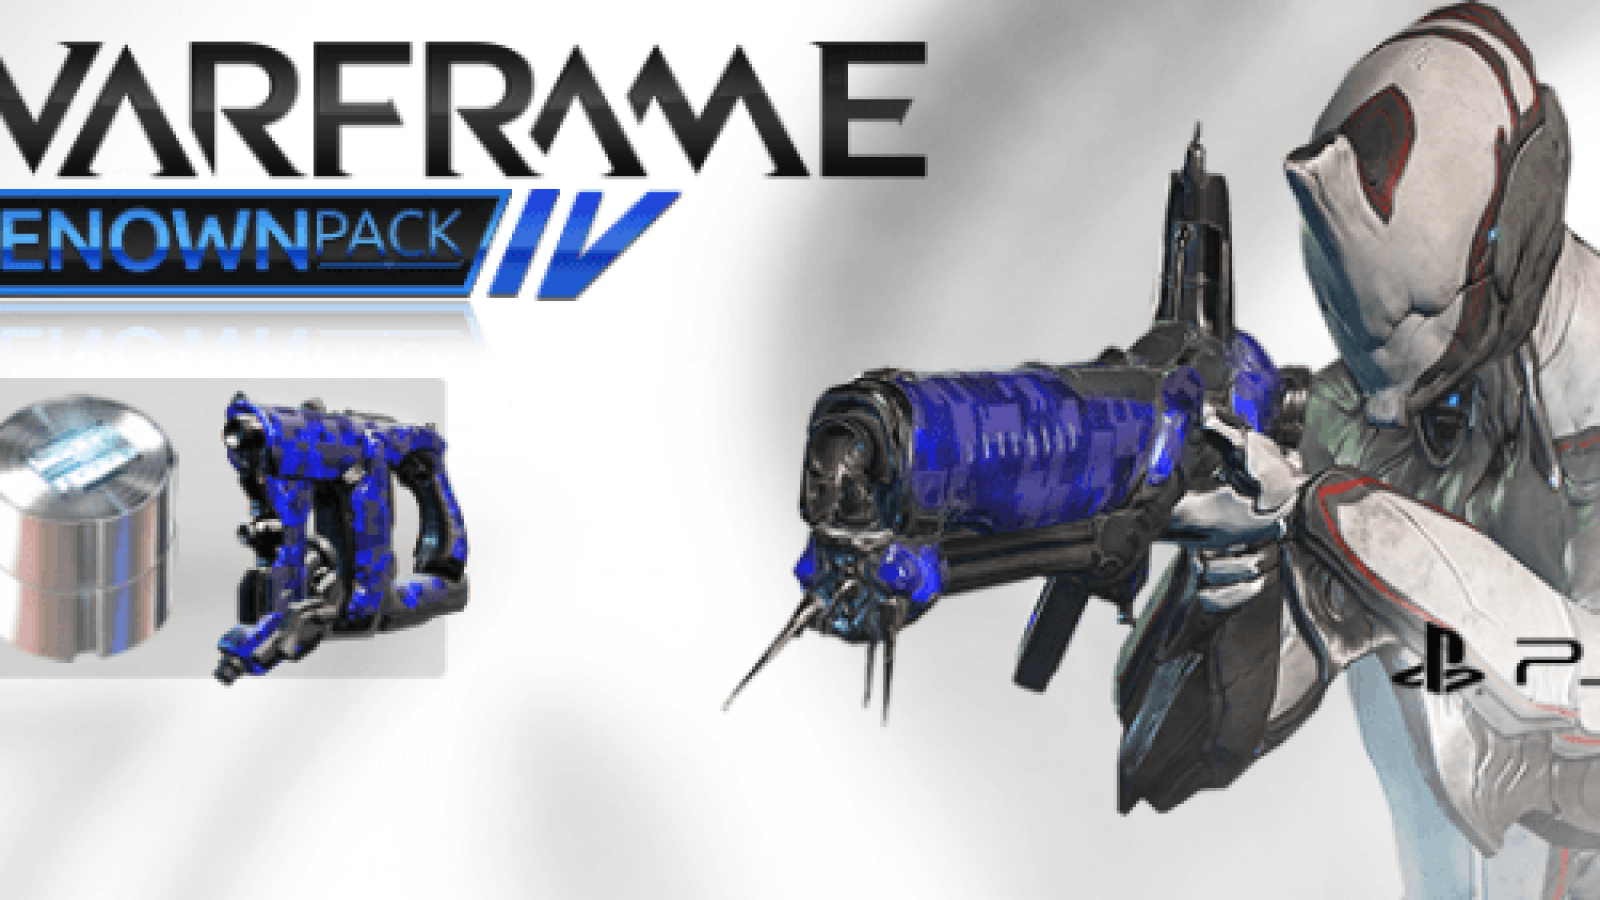 LAST CHANCE FOR RENOWN PACK IV!